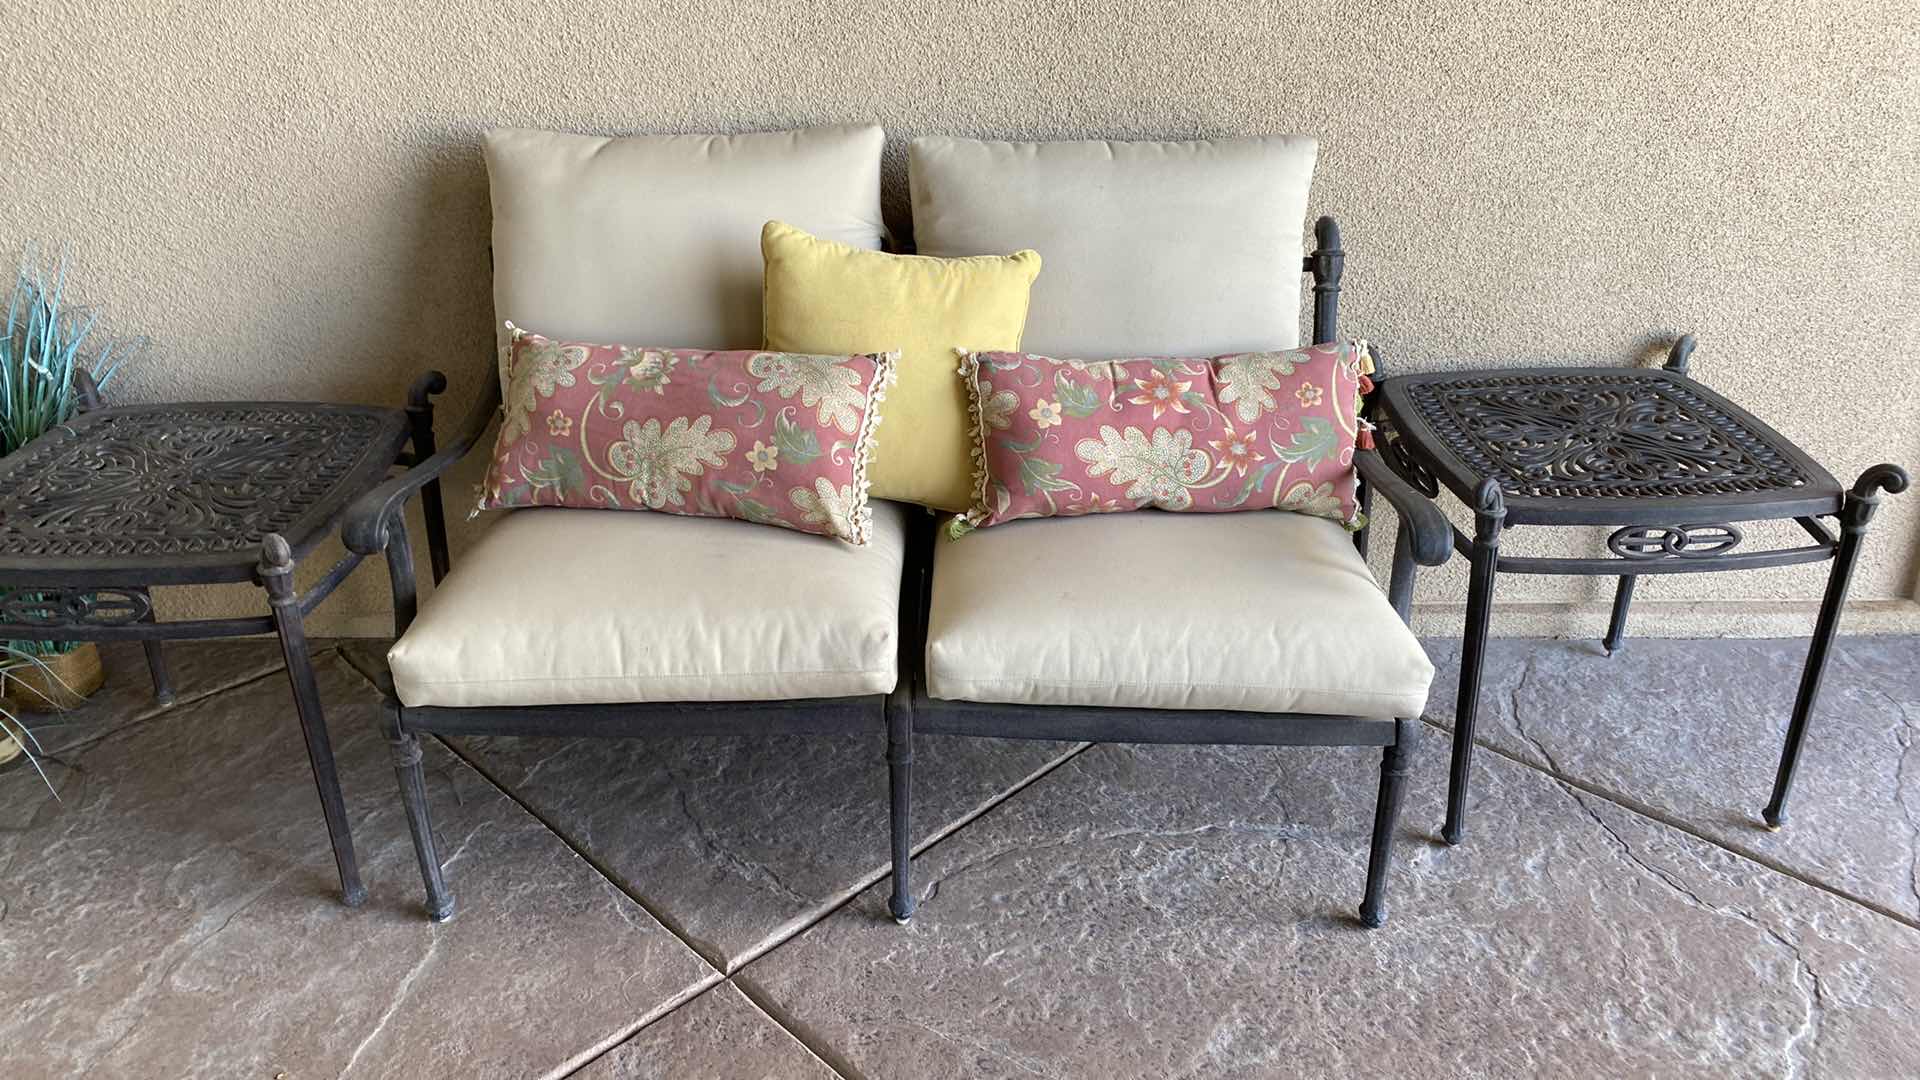 Photo 1 of HEAVY UNBRANDED WROUGHT IRON PATIO LOVESEAT WITH CUSHIONS  56” X 33” H 33” AND 2 END TABLES 23“ x 23“ H 24“